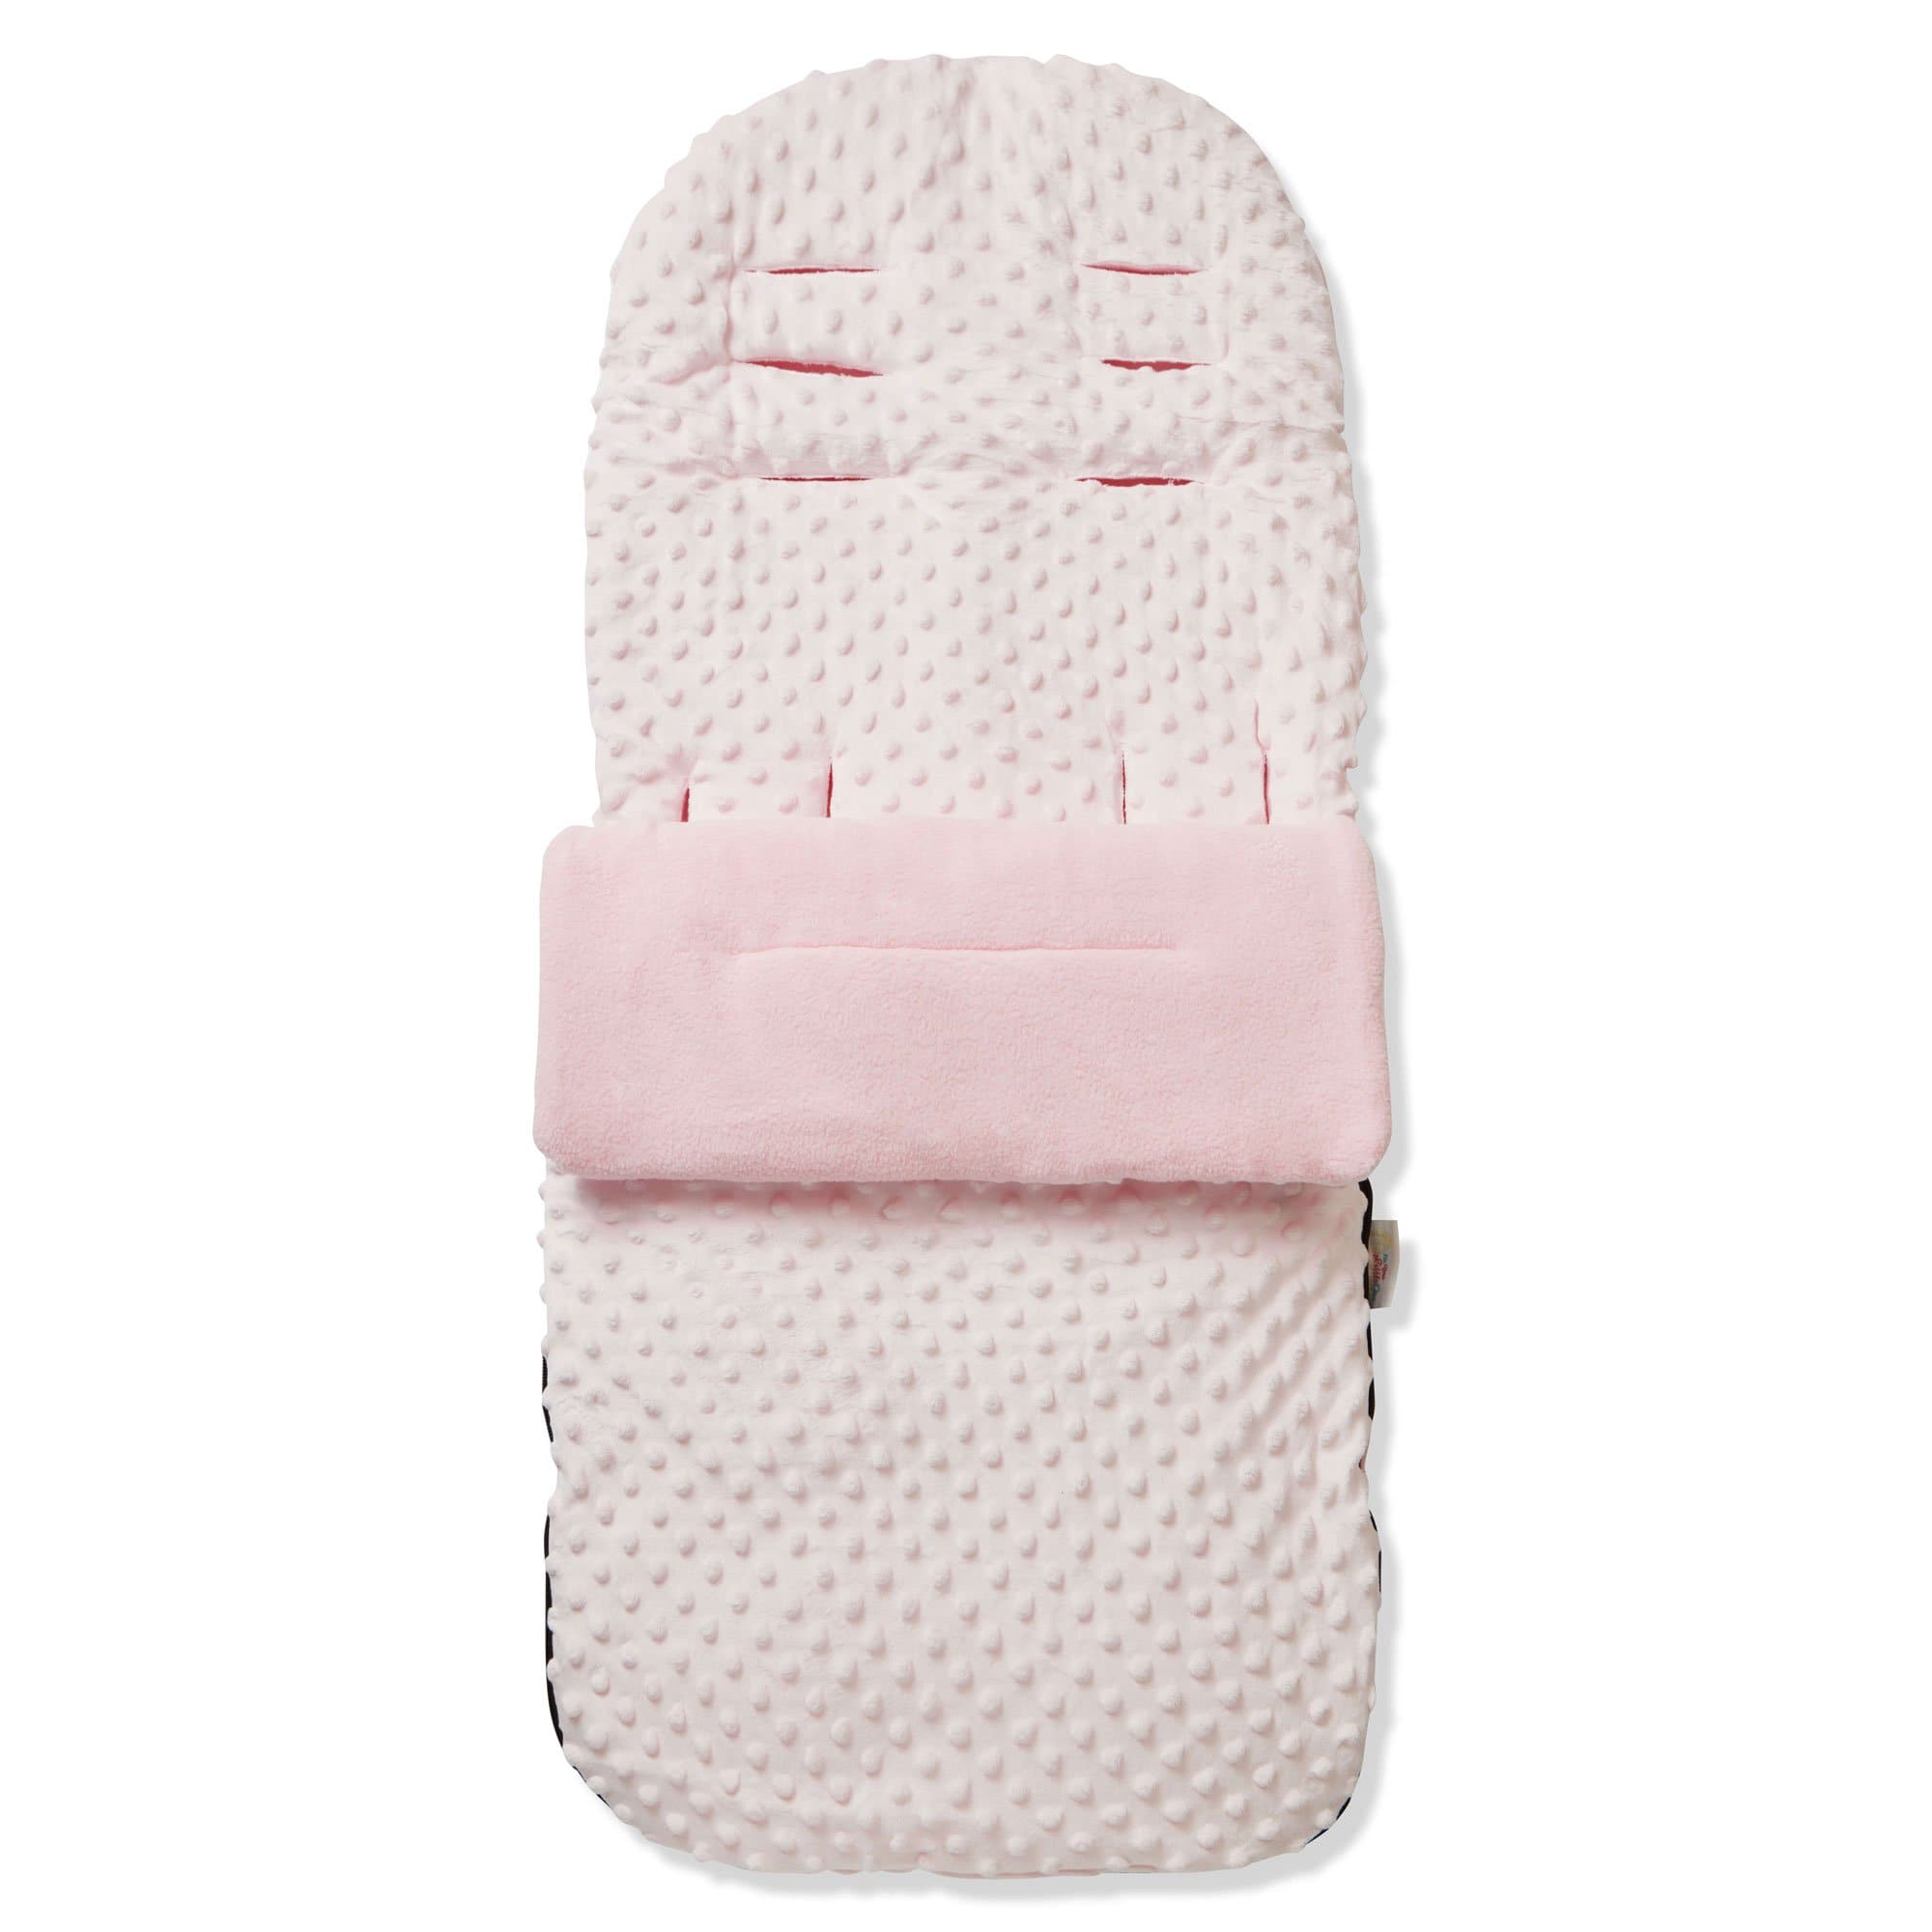 Dimple Footmuff / Cosy Toes Compatible with Formula - Pink / Fits All Models | For Your Little One